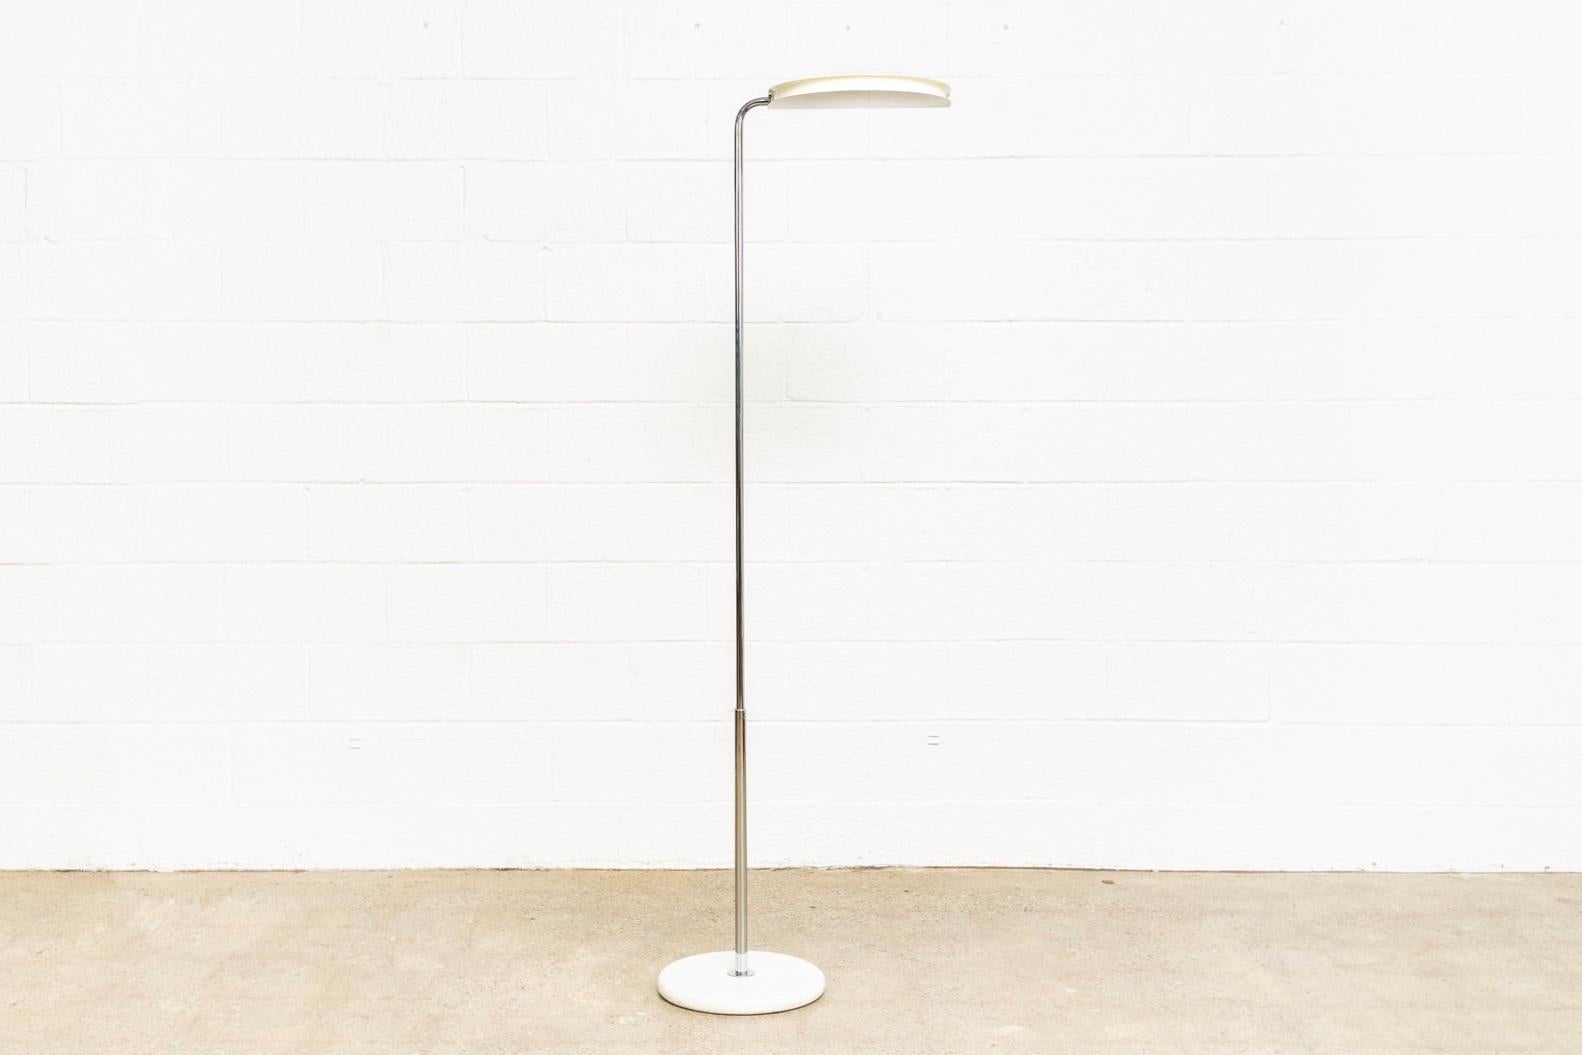 This vintage Mid-Century Modern Italian Bruno Gecchelin “Mezzaluna“ floor lamp is circa 1970. The sleek Space Age modernist design features a chrome-plated steel stem on a white Carrara marble base. The lamp swivels at the stem and the white